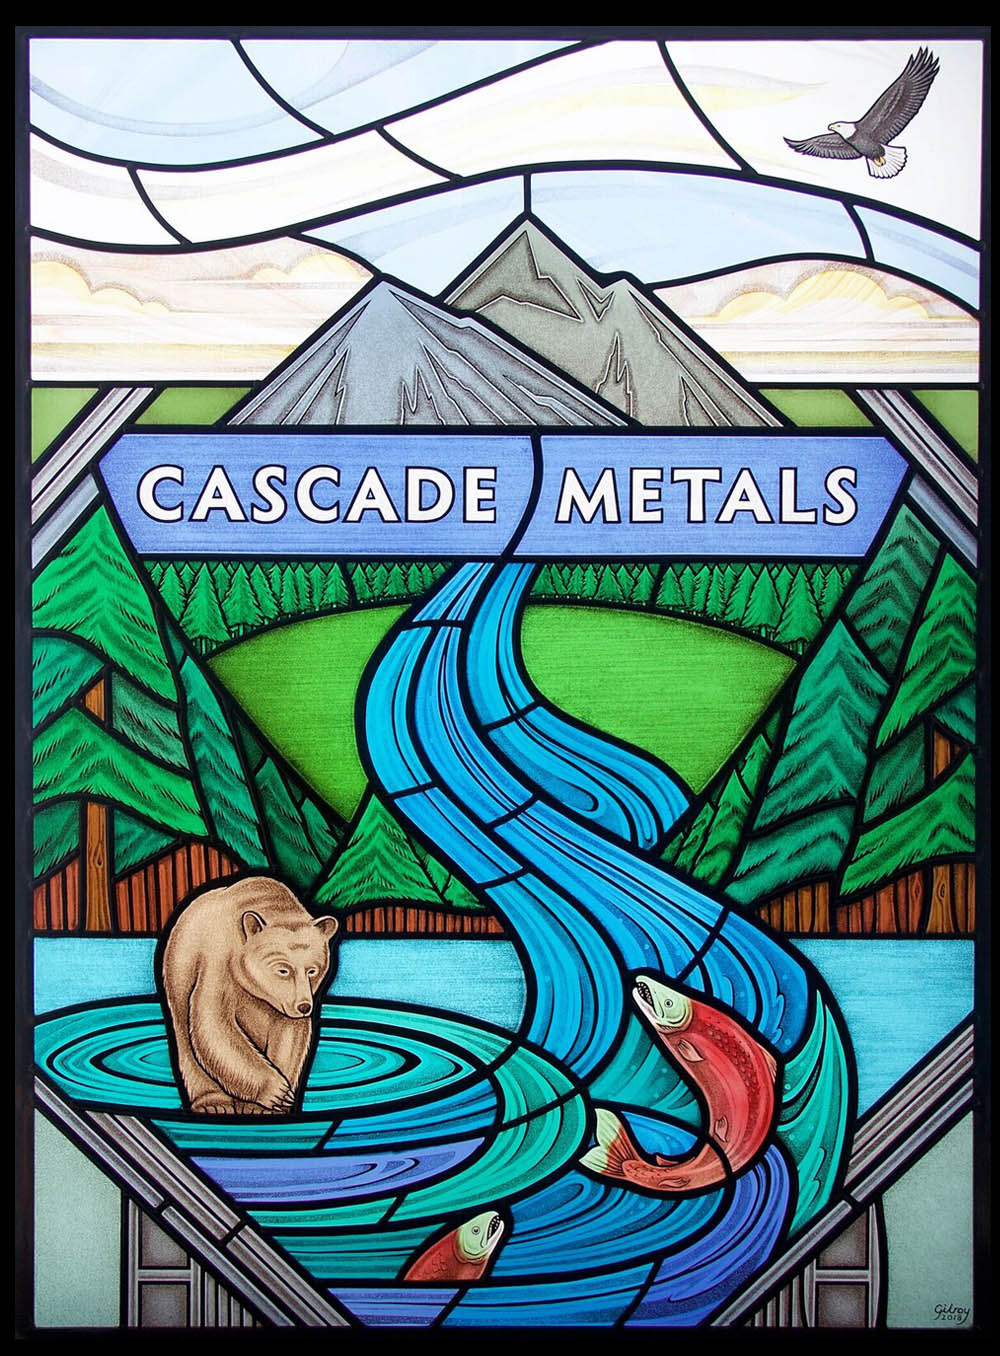 Lead for stained glass, Cascade metals